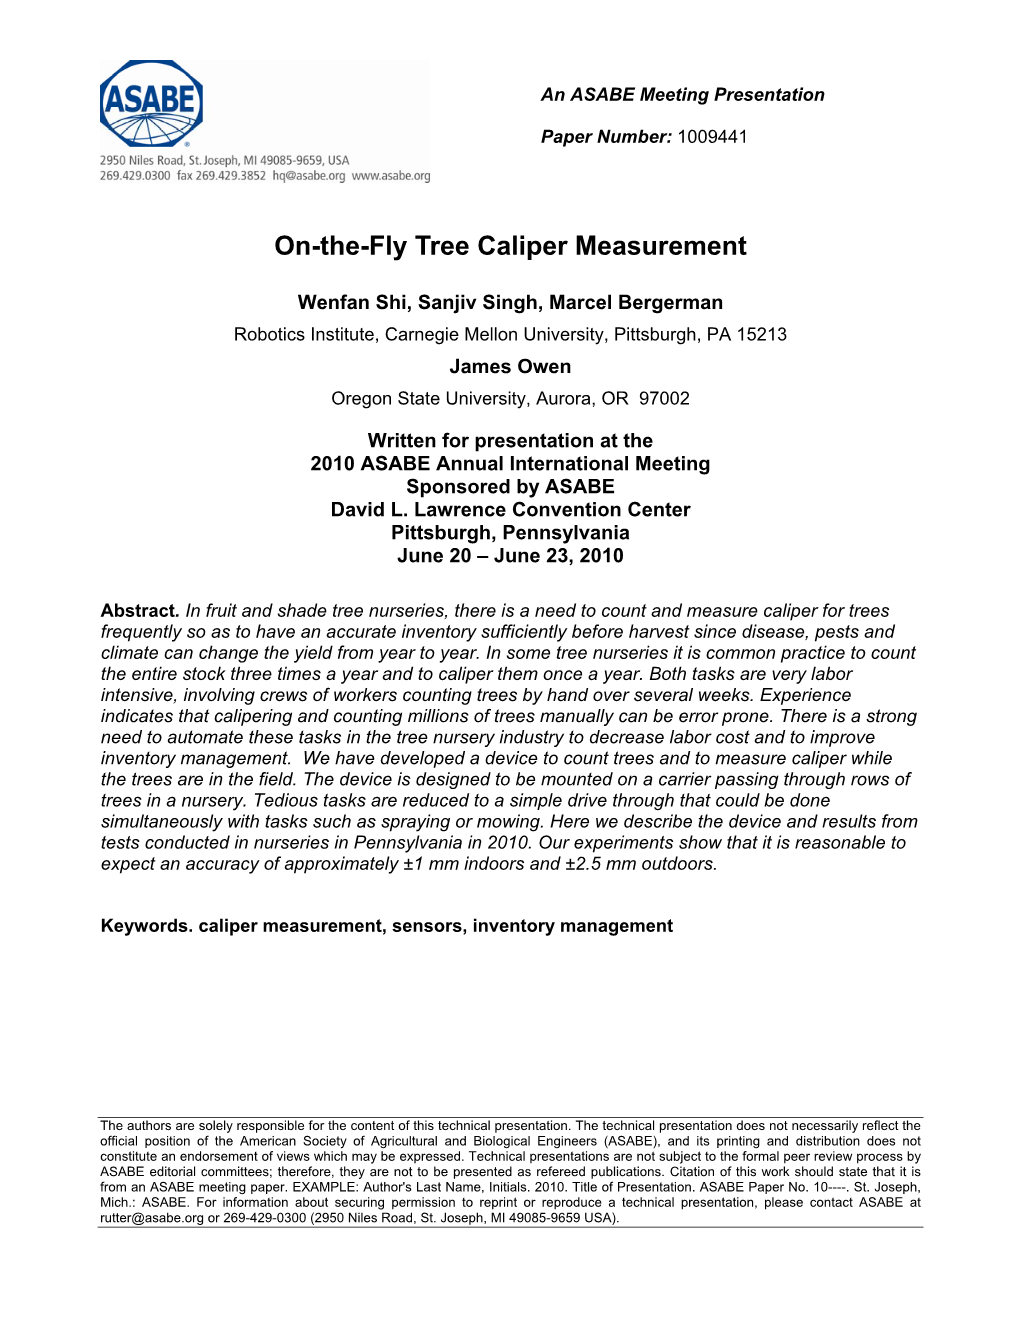 On-The-Fly Tree Caliper Measurement